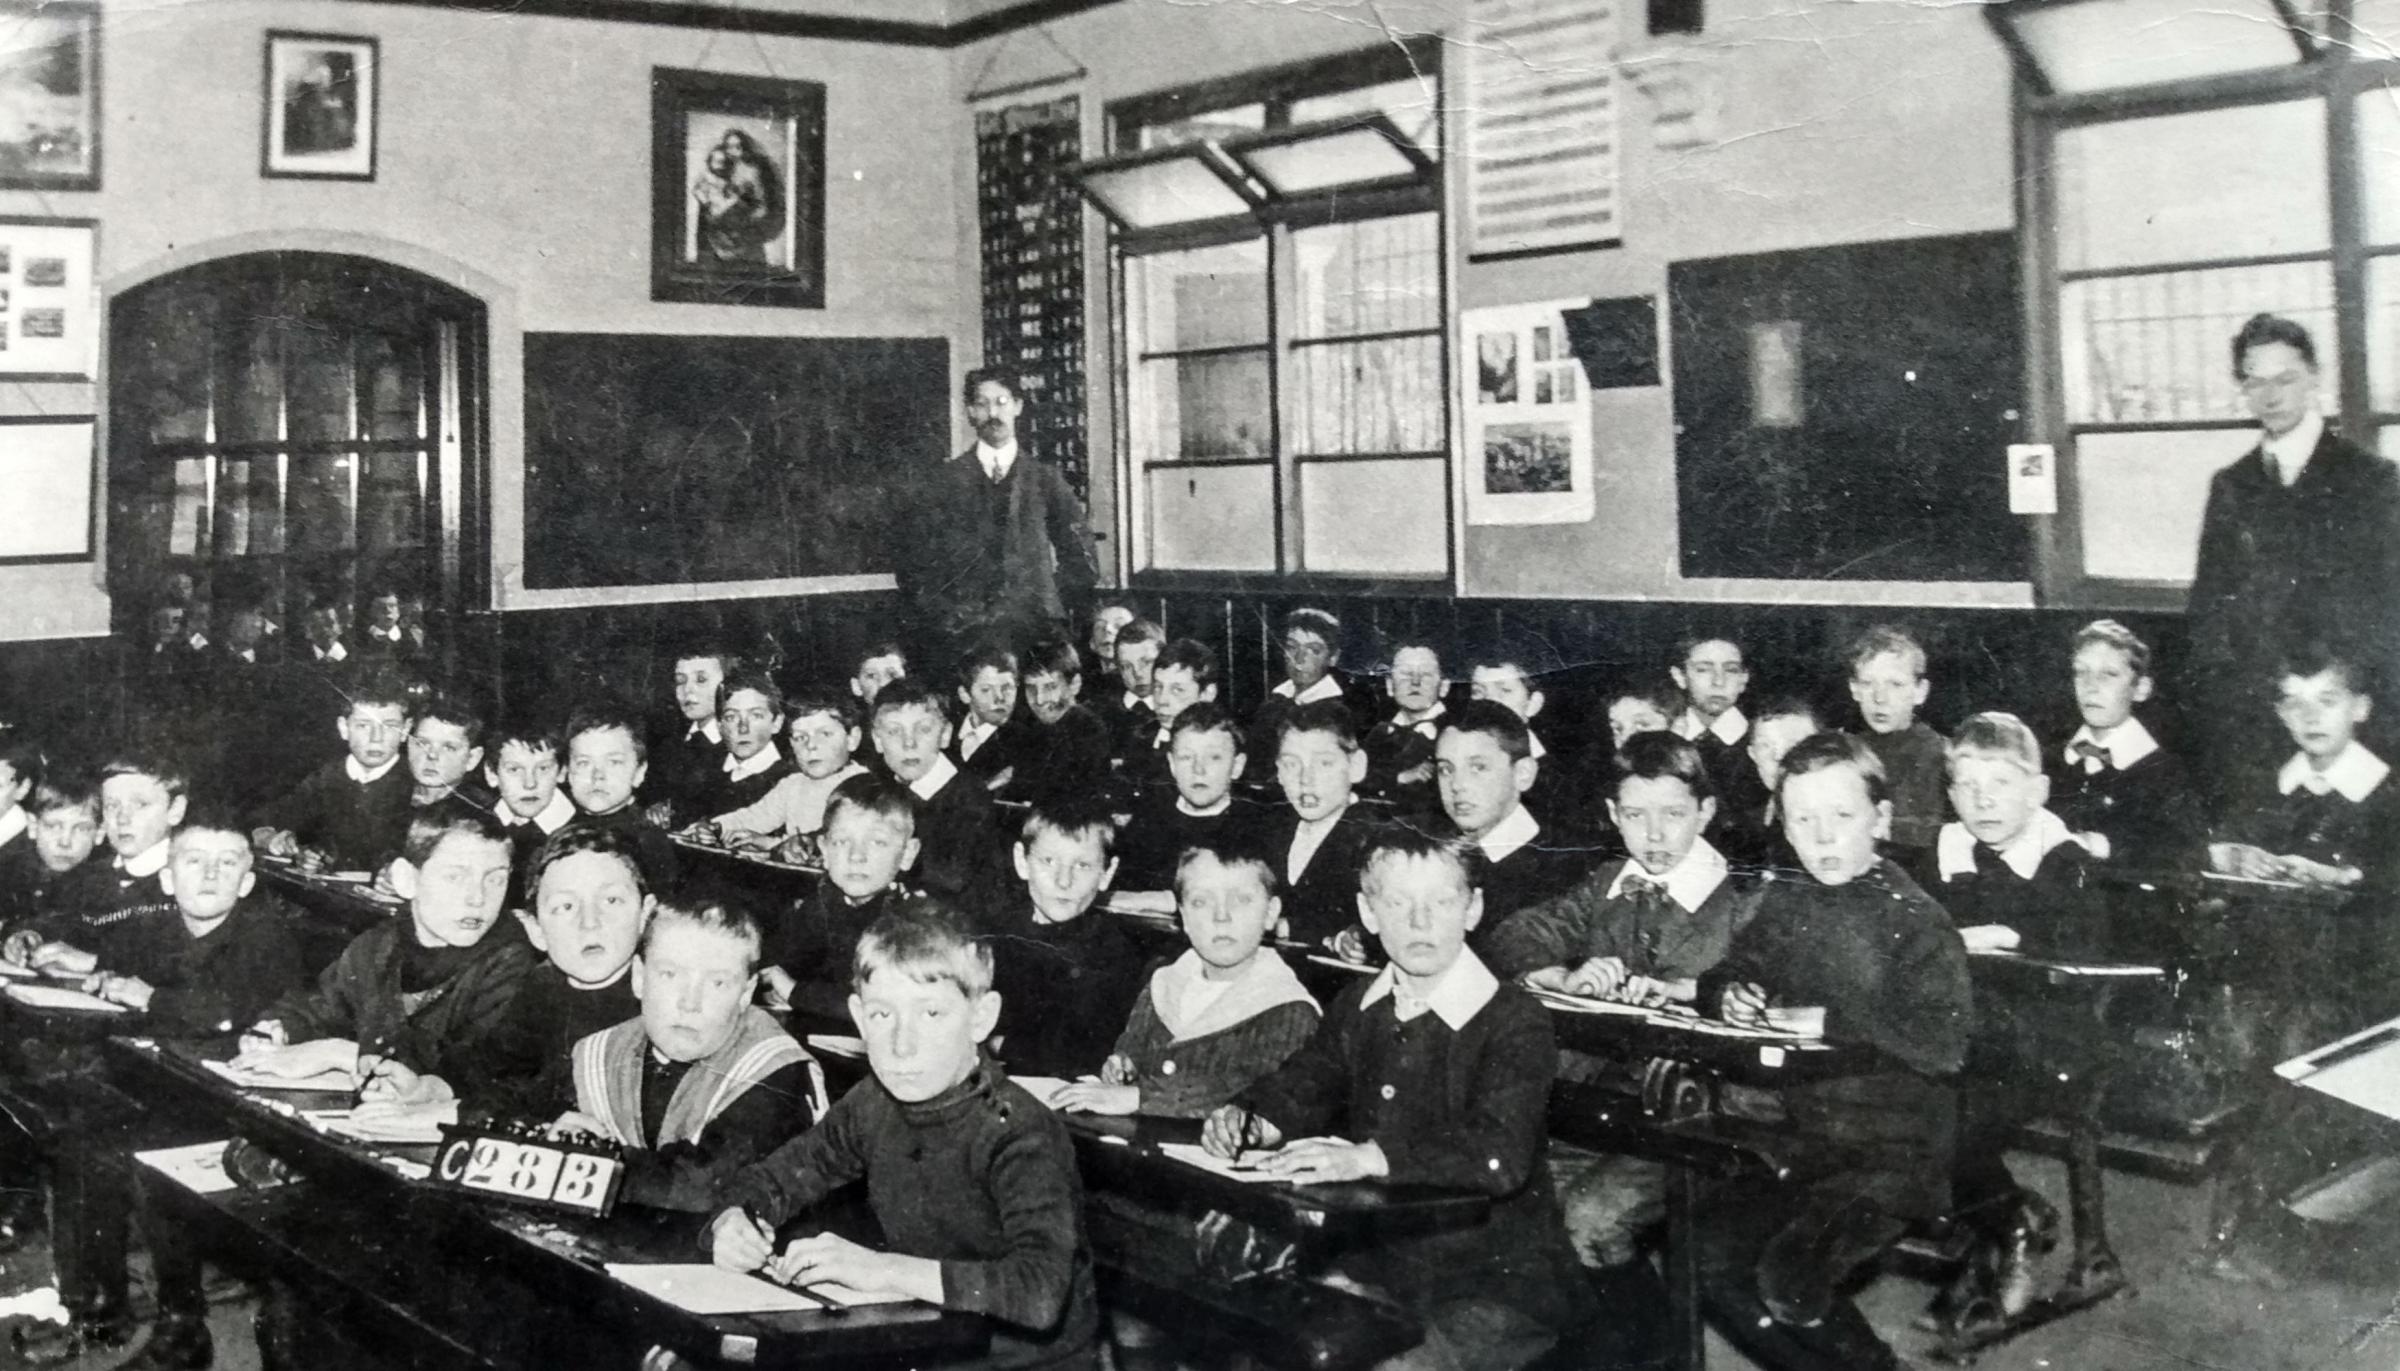 A hugely evocative photograph of Rainbow Hill Junior School, Classroom 10, taken in 1912